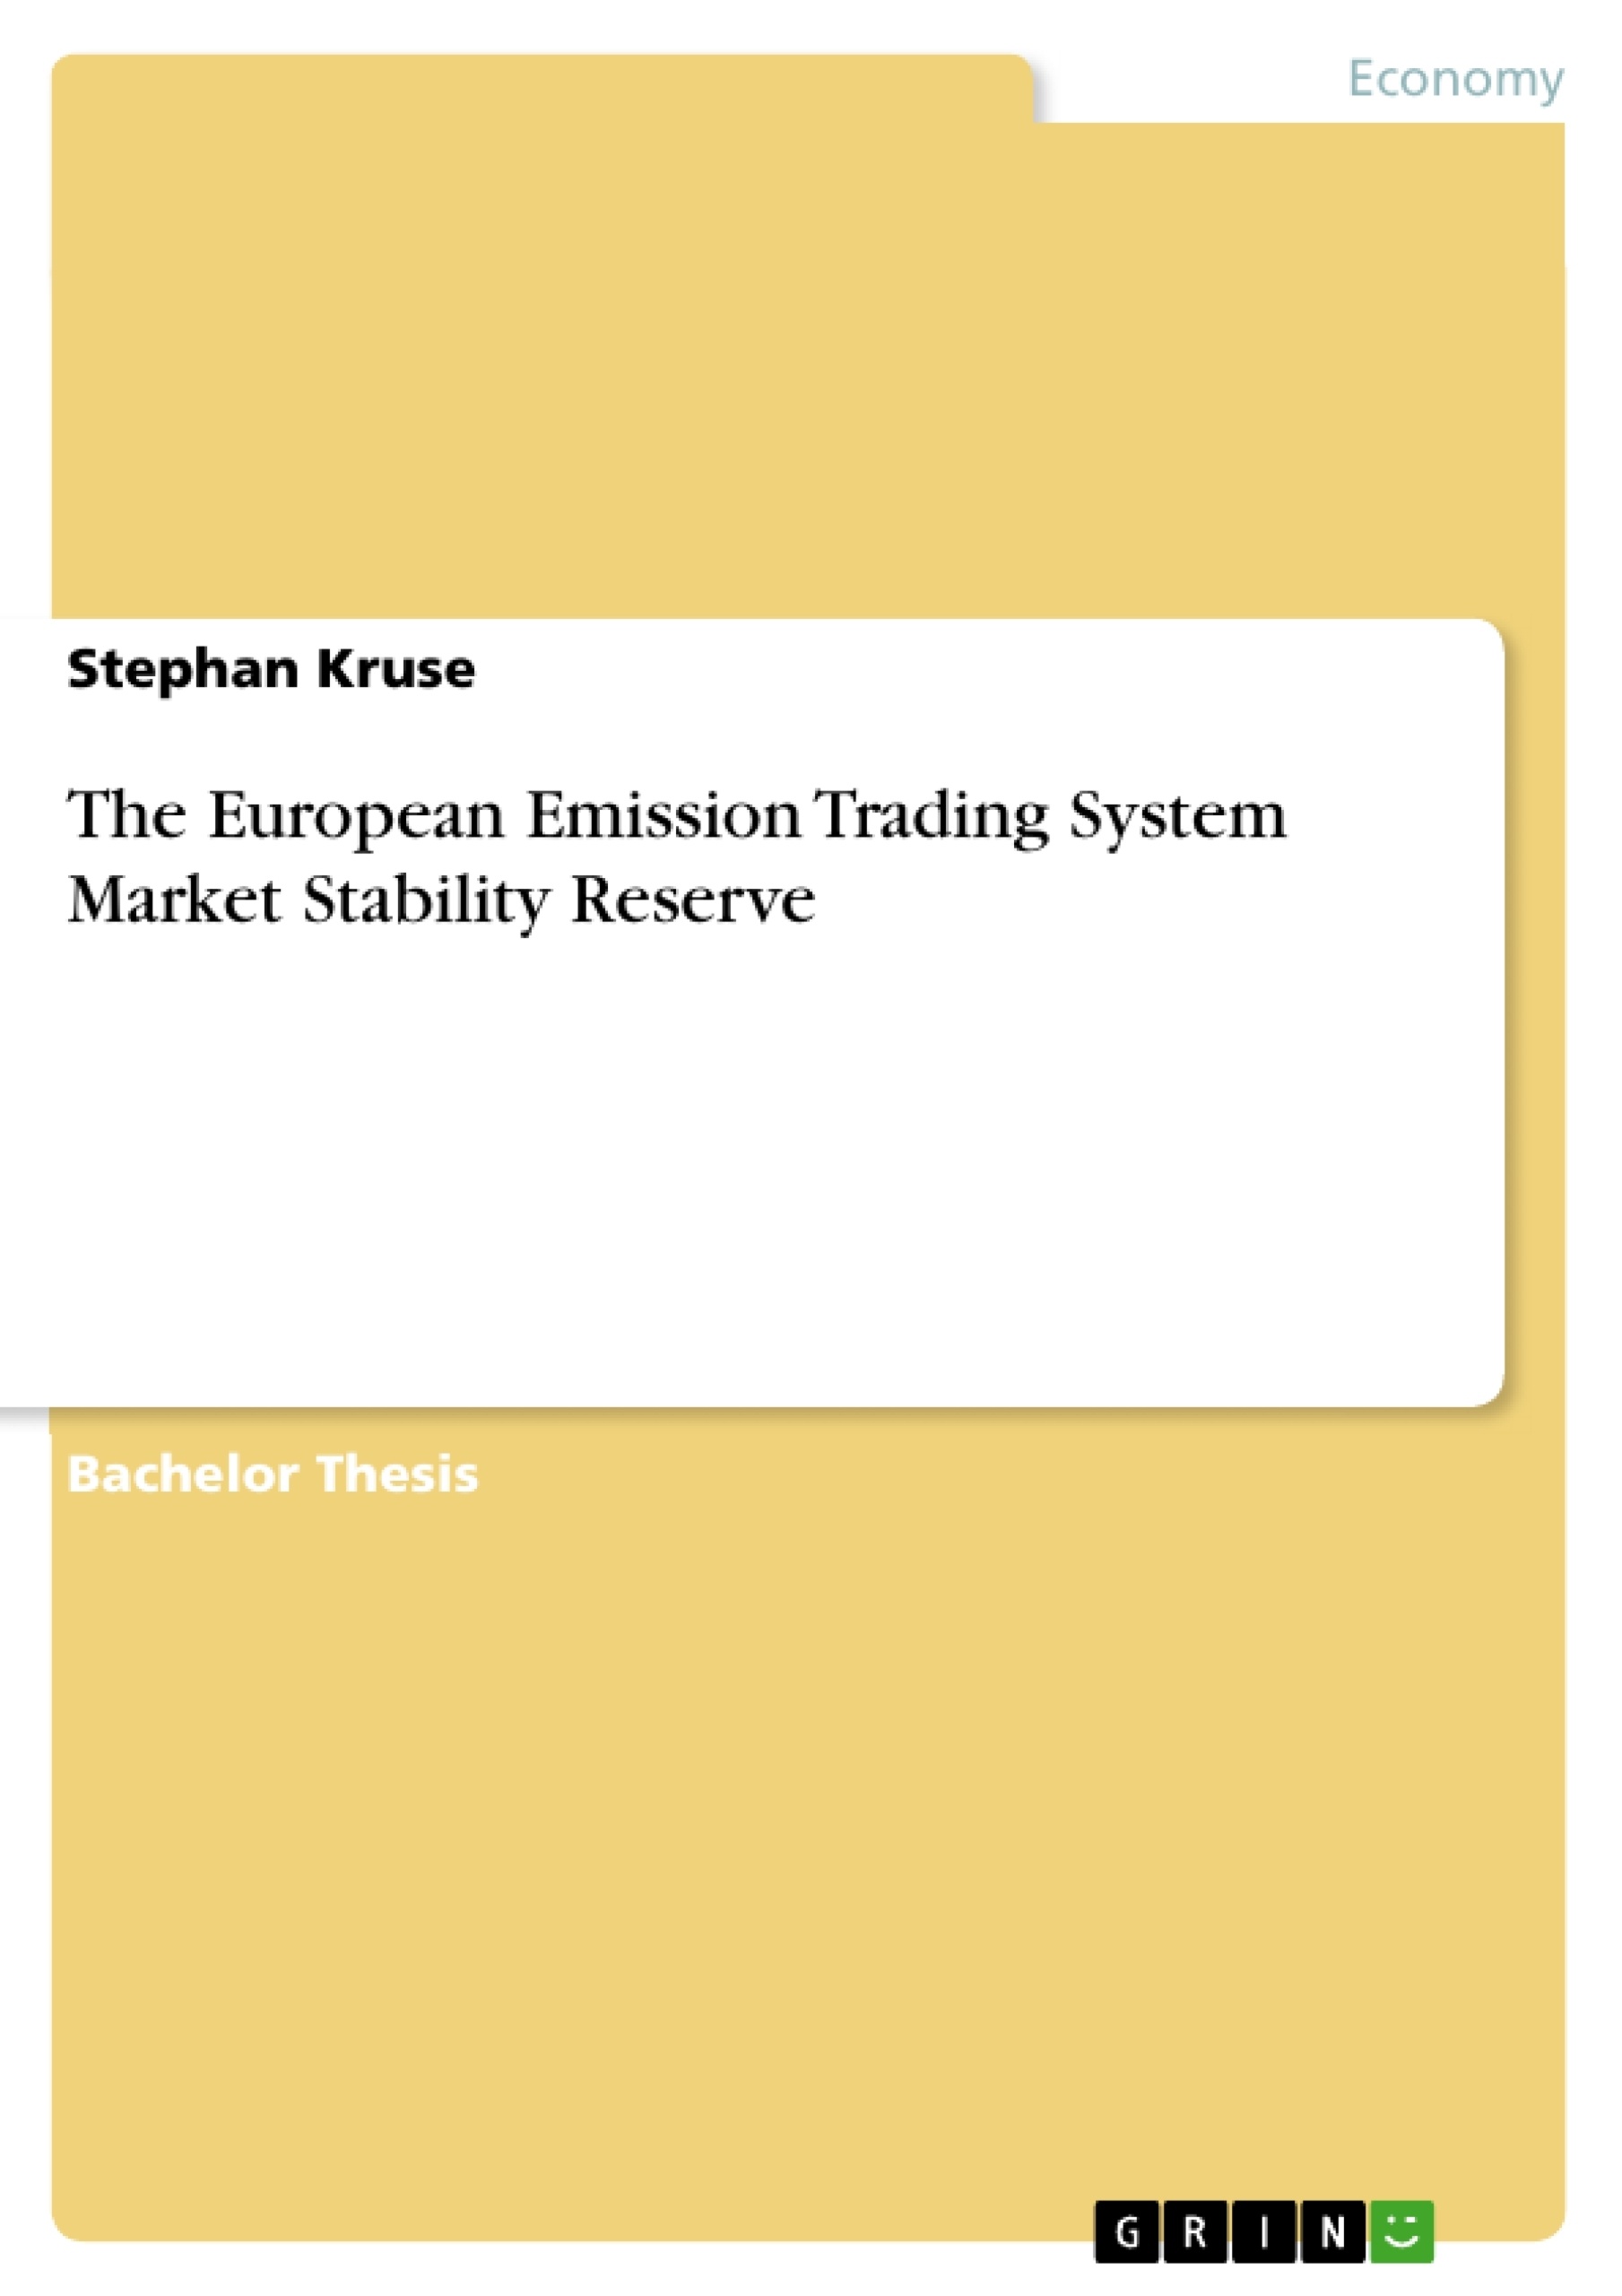 Title: The European Emission Trading System Market Stability Reserve